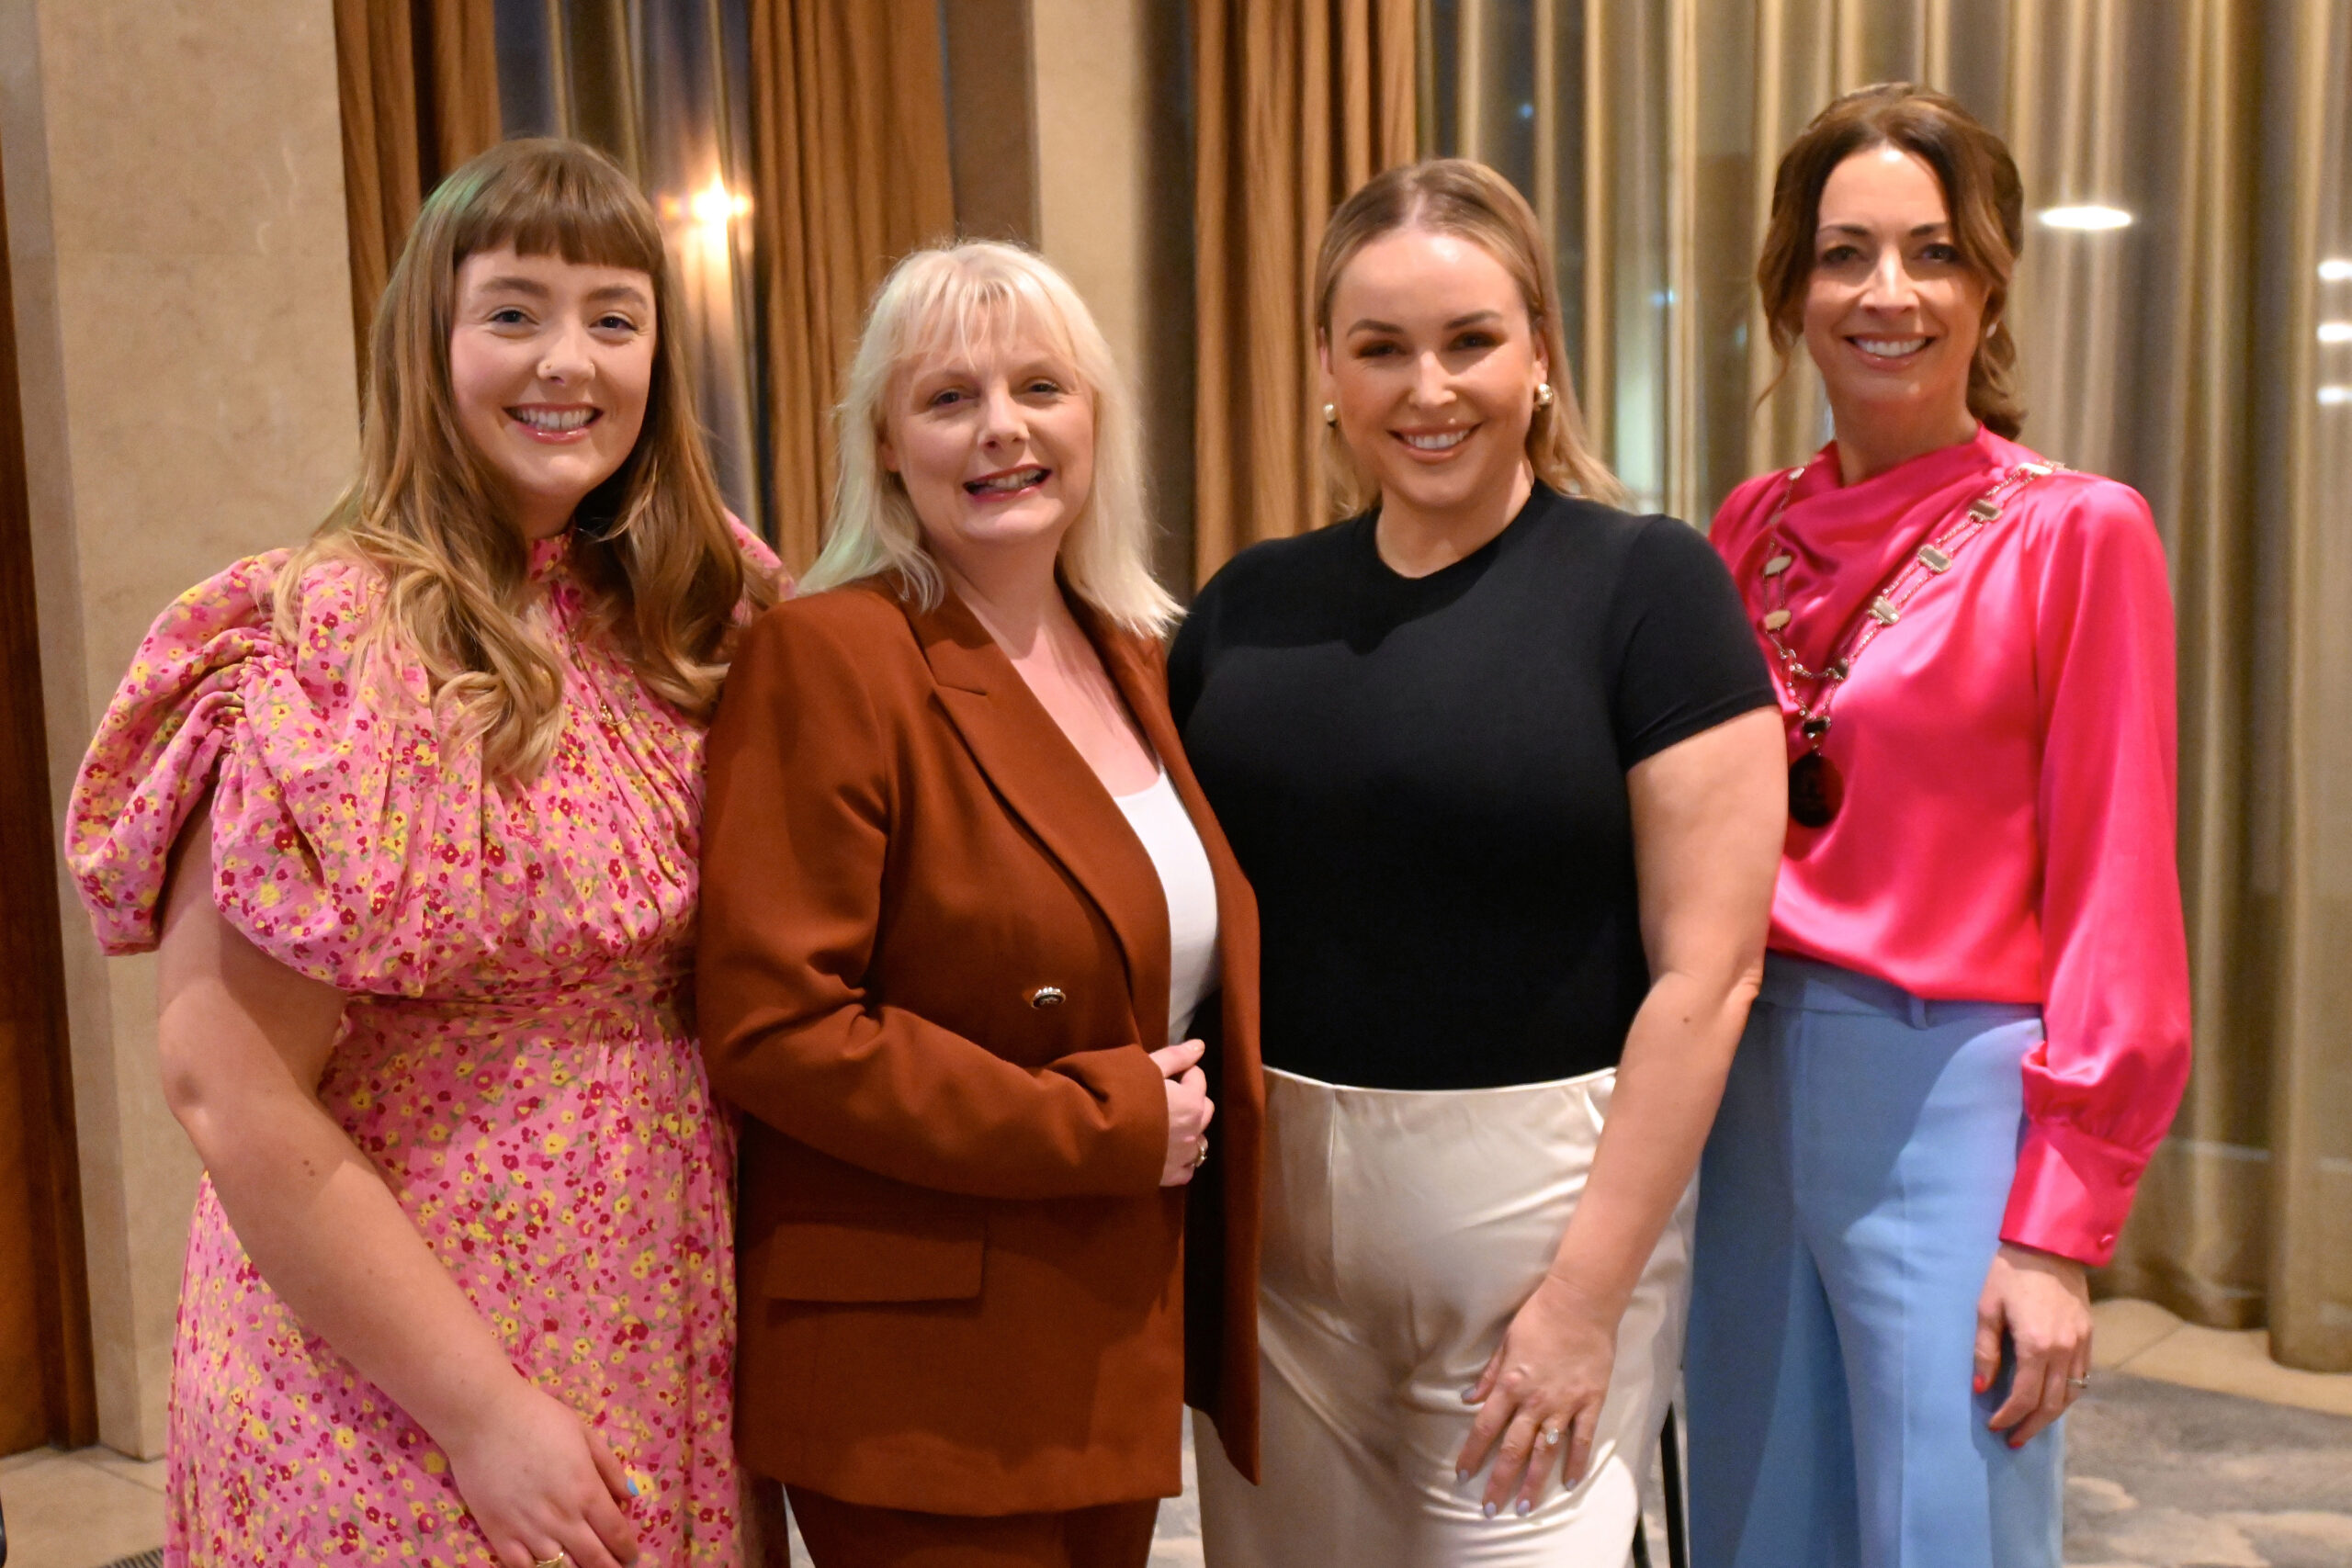 Network Ireland Limerick March International Women's Day event at the Savoy hotel pictured Nell Stritch, Pressed flowers By Nell and April Drew, Drew Media, Sinead O’Brien, Vacious and Network Limerick, president Fiona Doyle